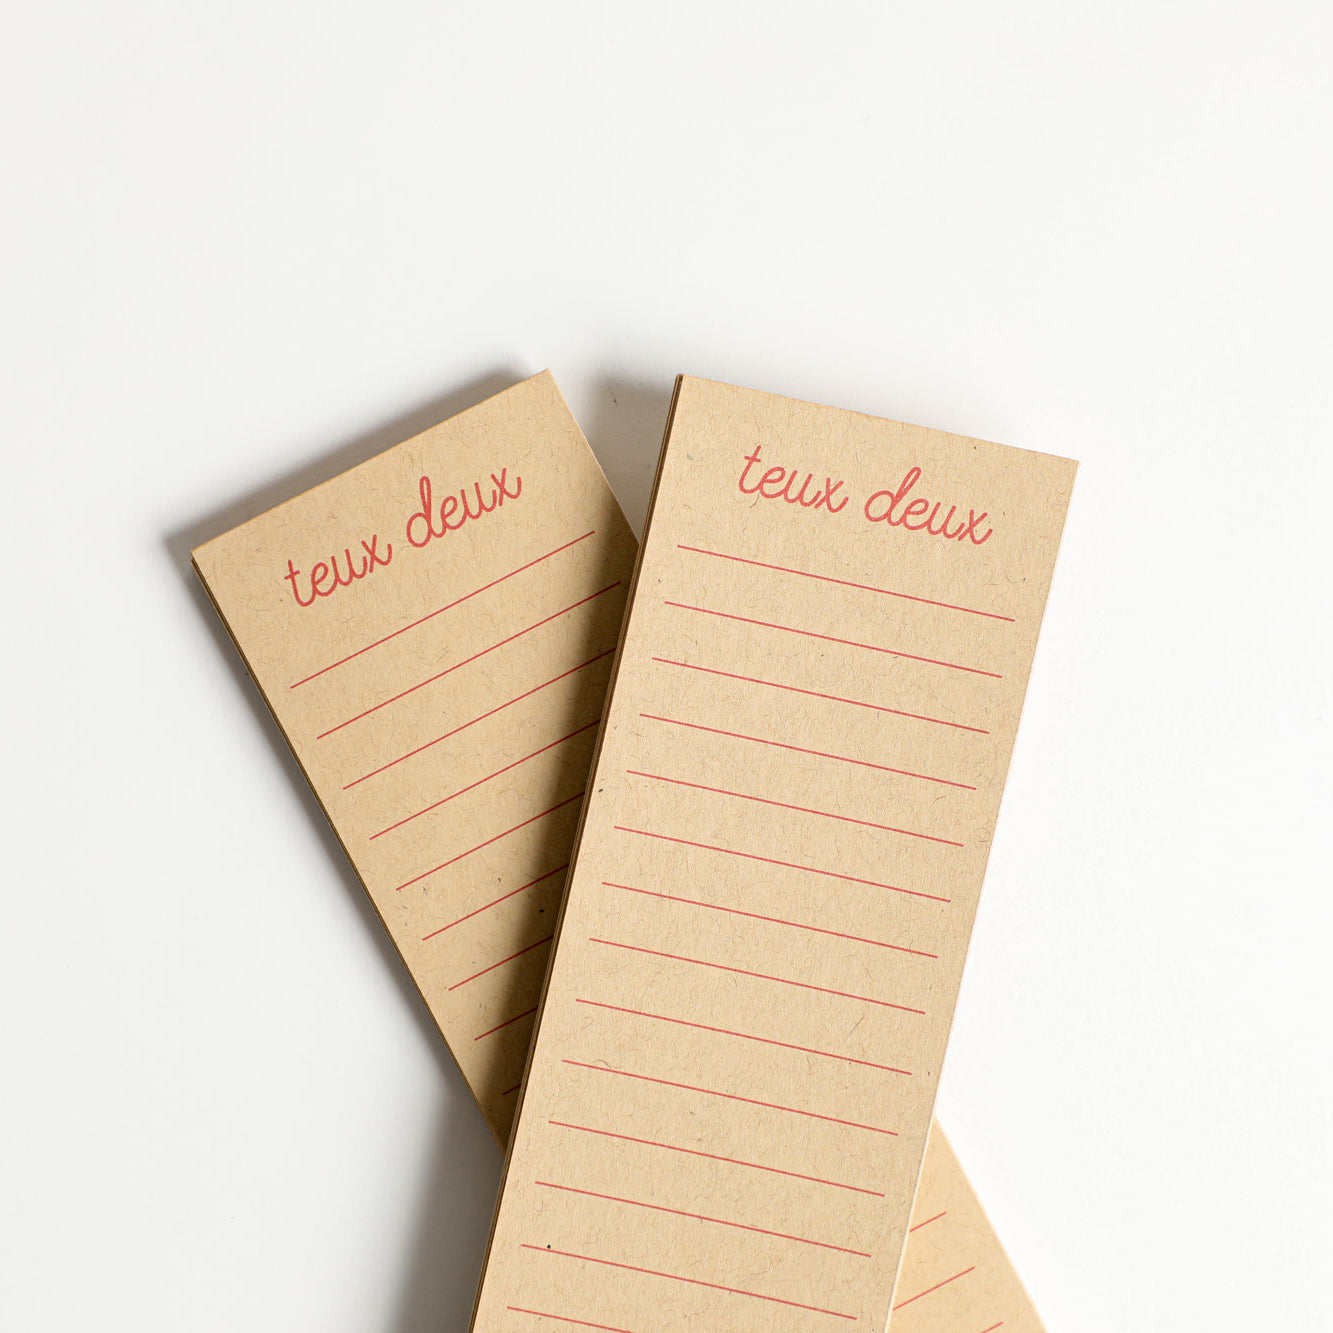 Teux Deux - Zero Waste Notepad - Gives to Feed the Second Line